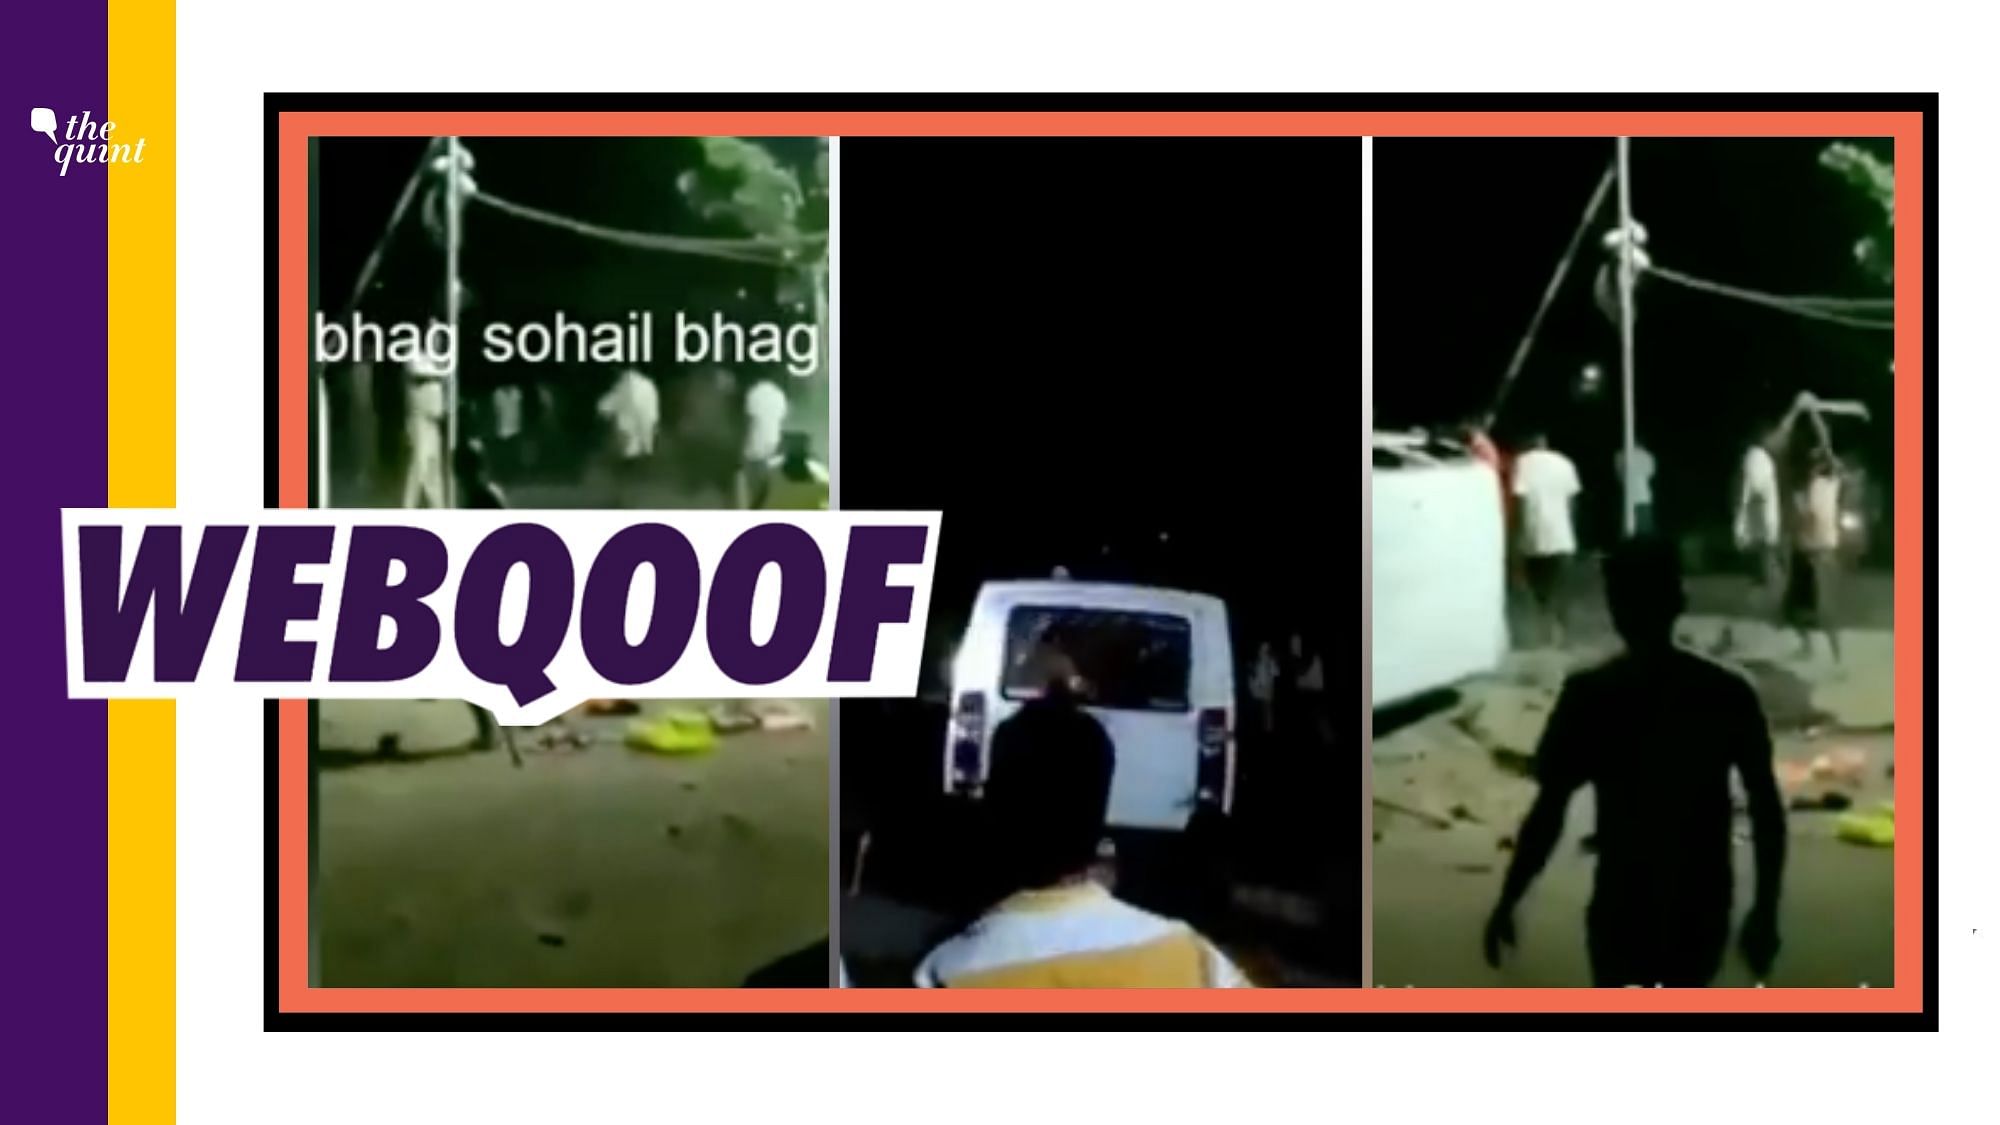 Viral videos related to the Palghar incident falsely claimed that ‘maar shoaib maar’ can be heard.